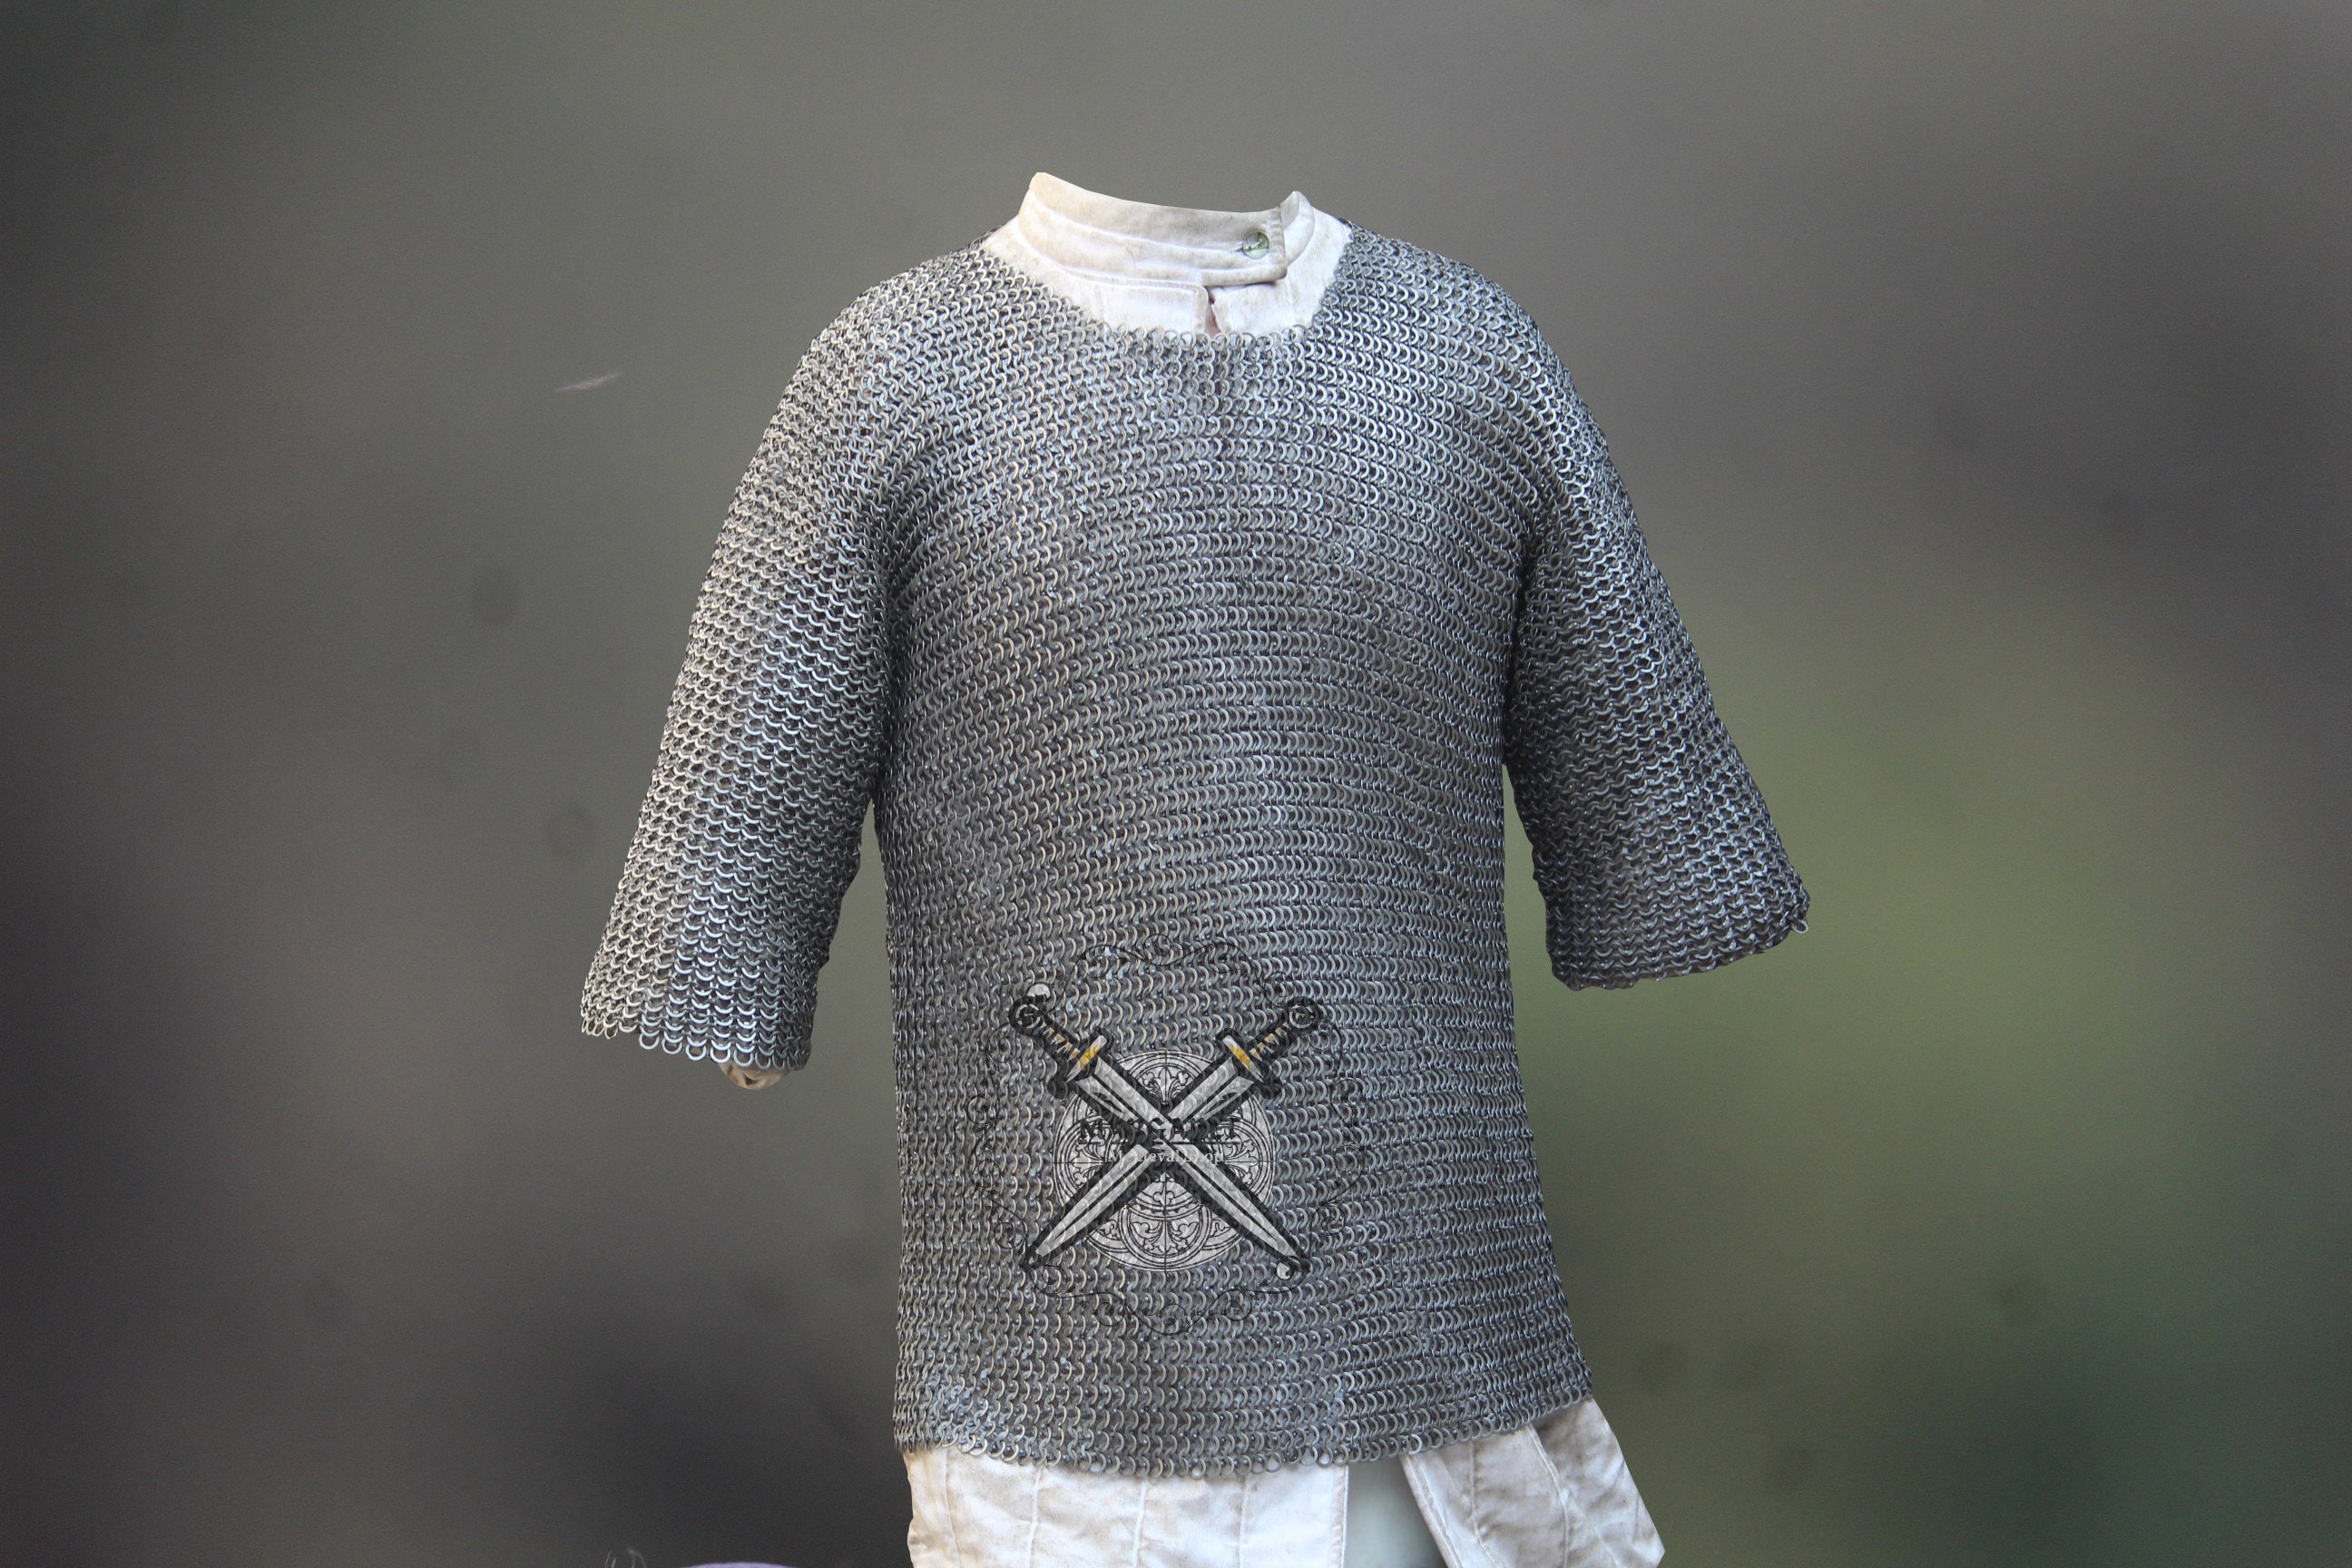 Ironskin - Shop for Riveted Chainmail: Tools, Clothes, Instructions